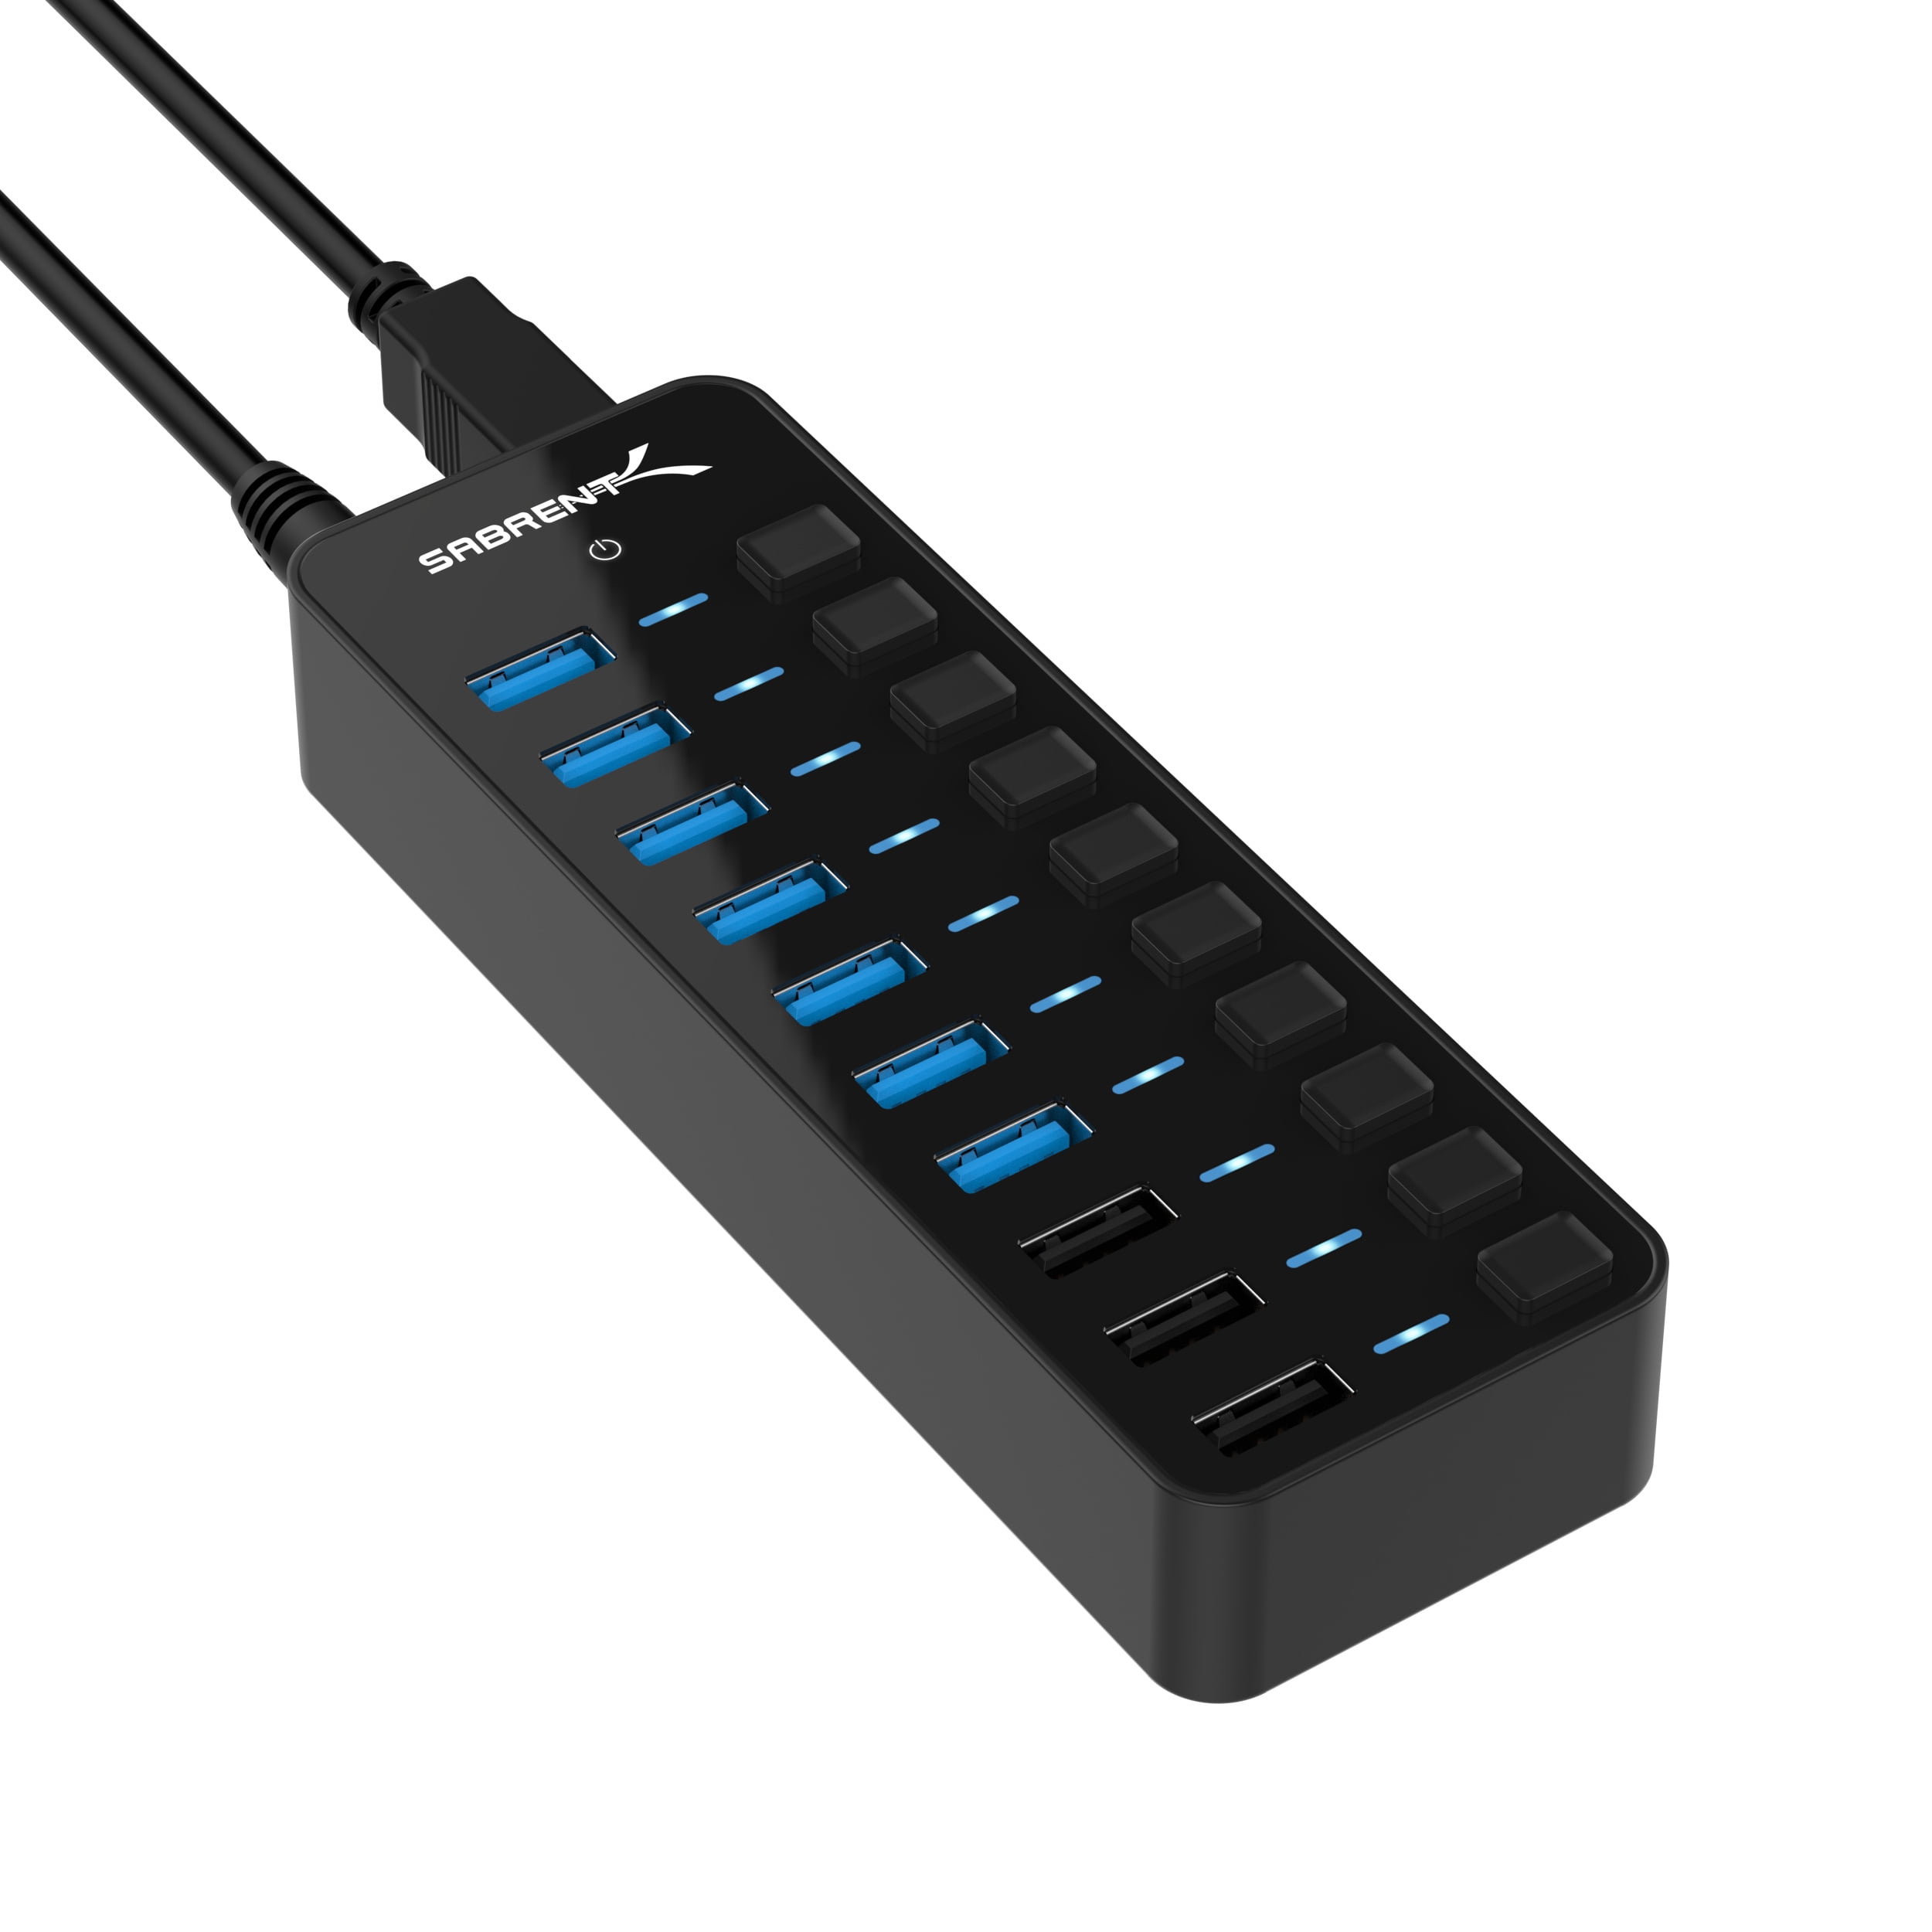 3 Port USB 3.0 Hub with SD/Micro SD Card Reader - Sabrent